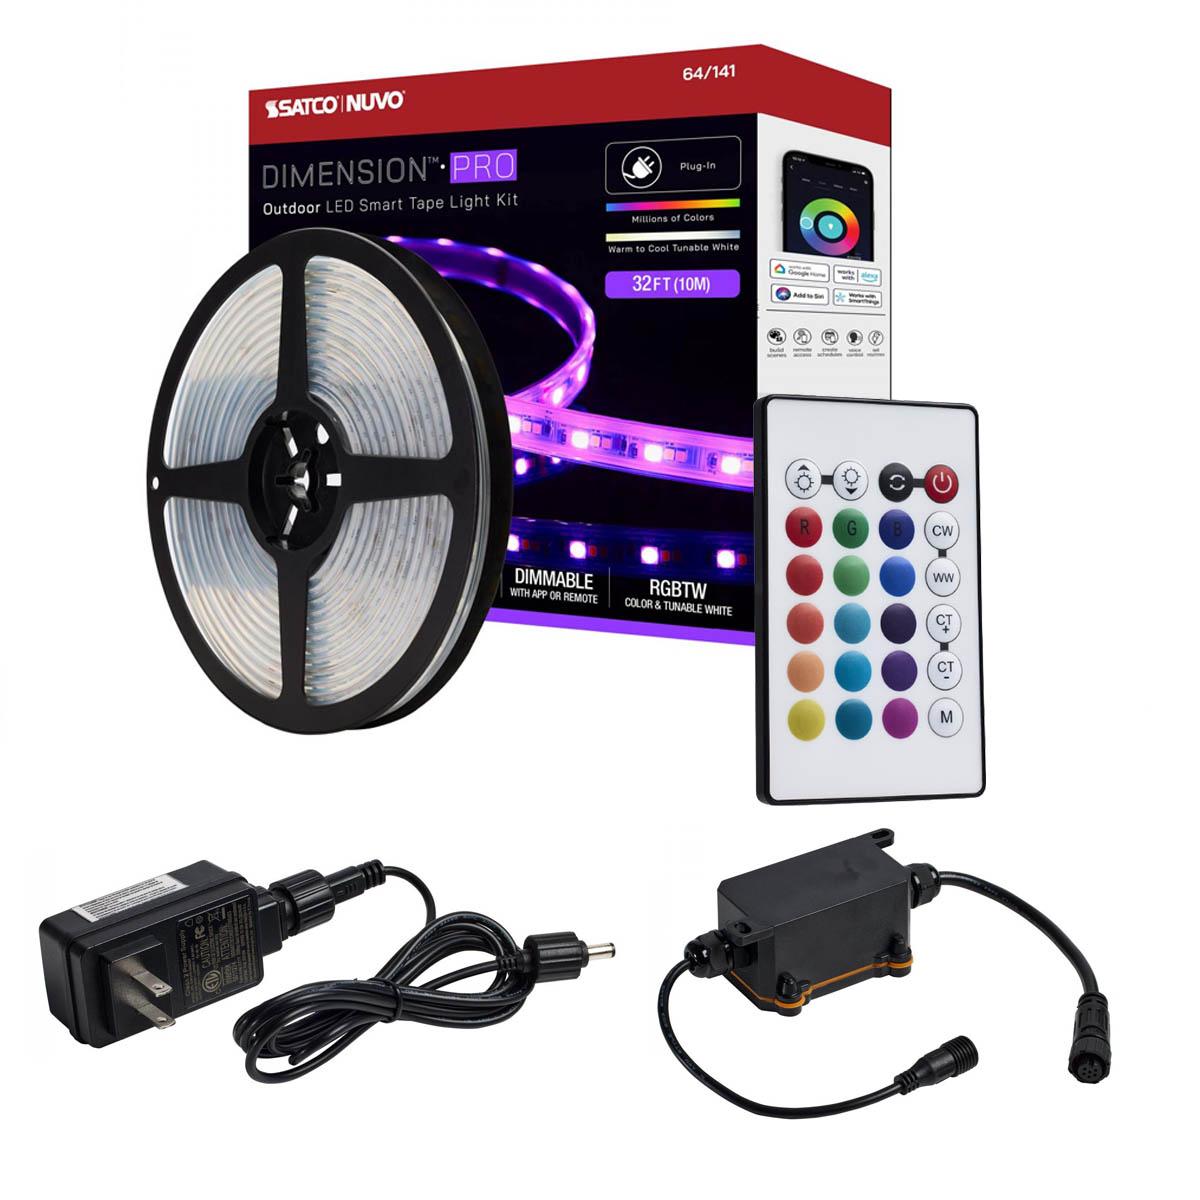 Dimension Pro Outdoor Smart LED Tape Light Kit with Remote, 32ft Reel, Color Changing RGB and Tunable White, 24V, Plug Connection